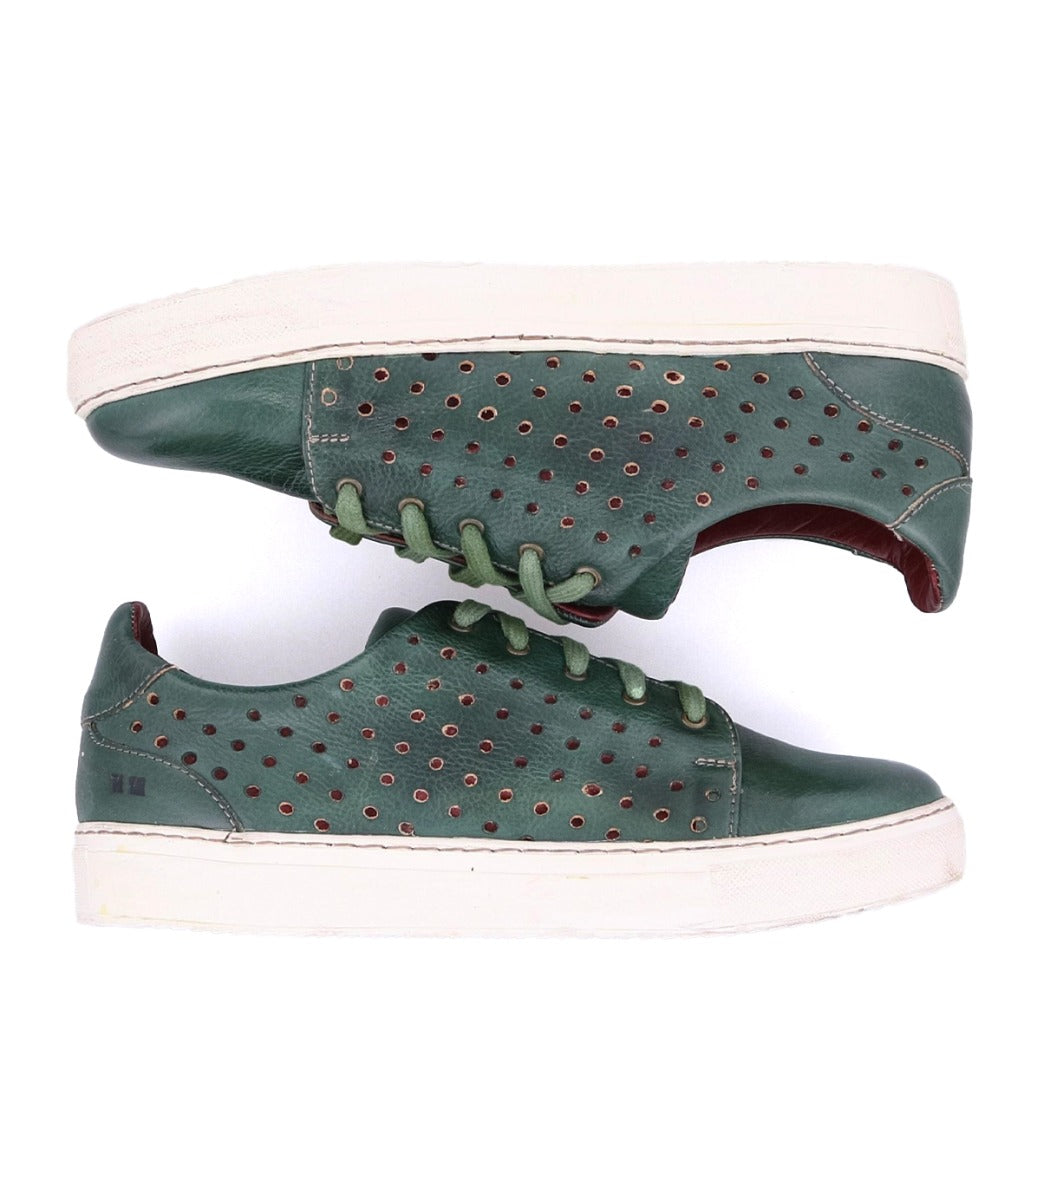 A pair of Lyne sneakers with perforations made by Bed Stu.